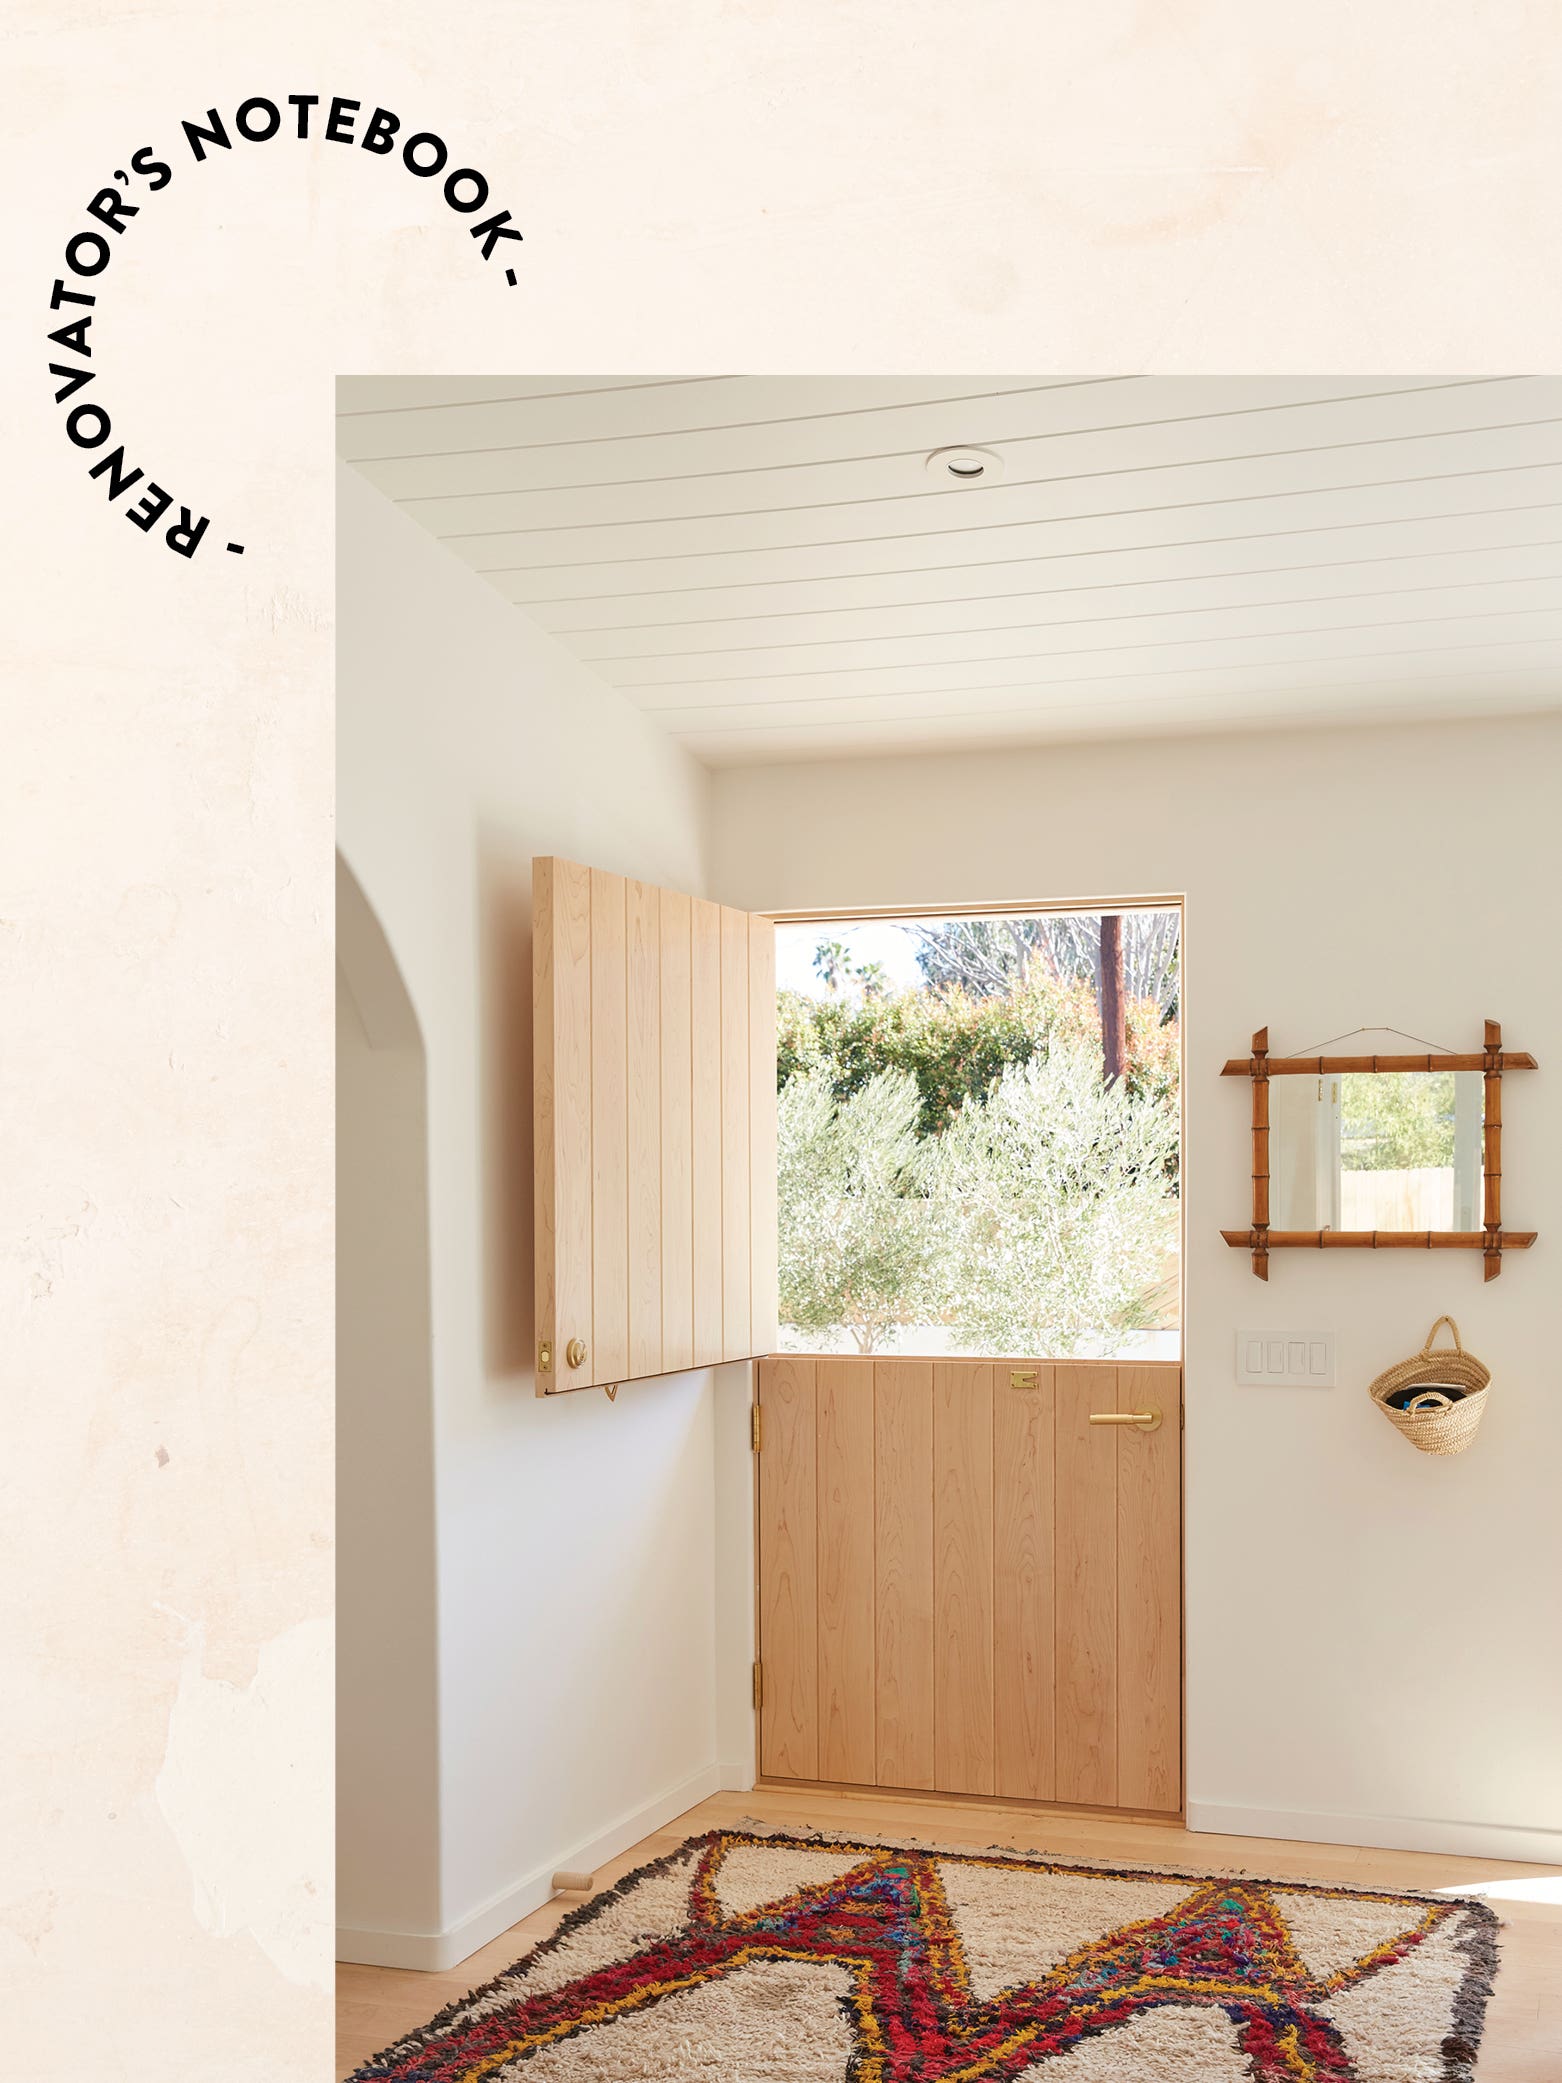 With $350K, I Gave My Ojai House Arches, Terrazzo Floors, and Even an Impromptu Dog Door